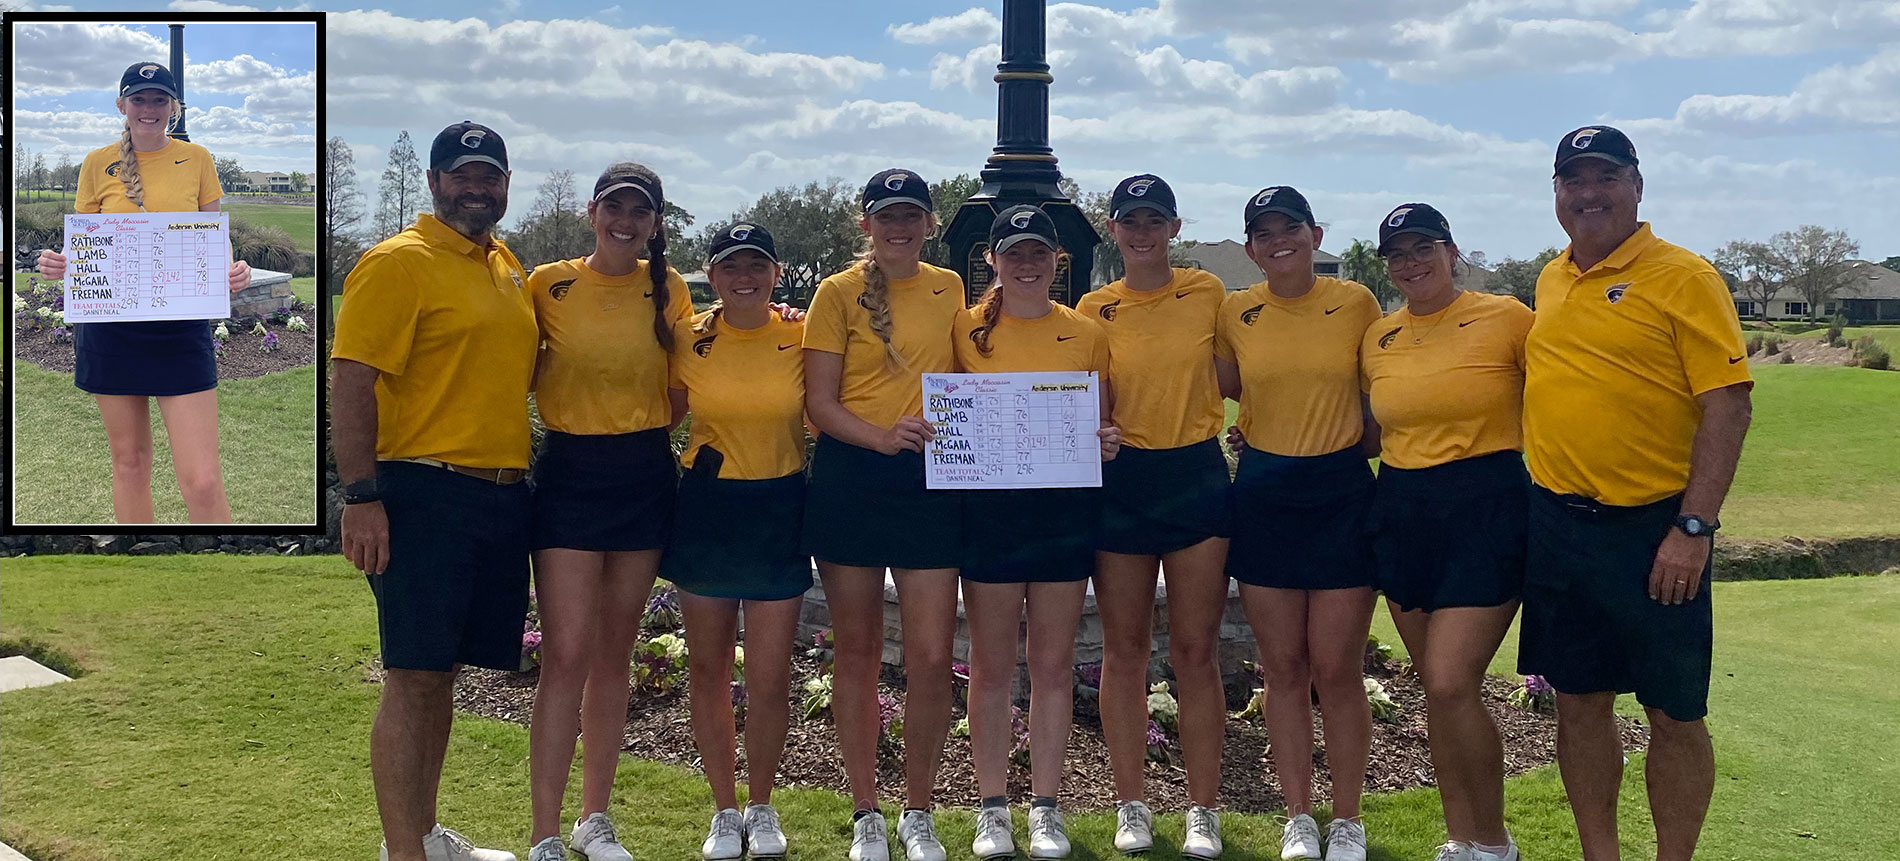 Lamb Fires School Record 66 in Final Round to Finish in Tie for Second at Lady Moc Classic; Leads Team to Runner-Up Finish